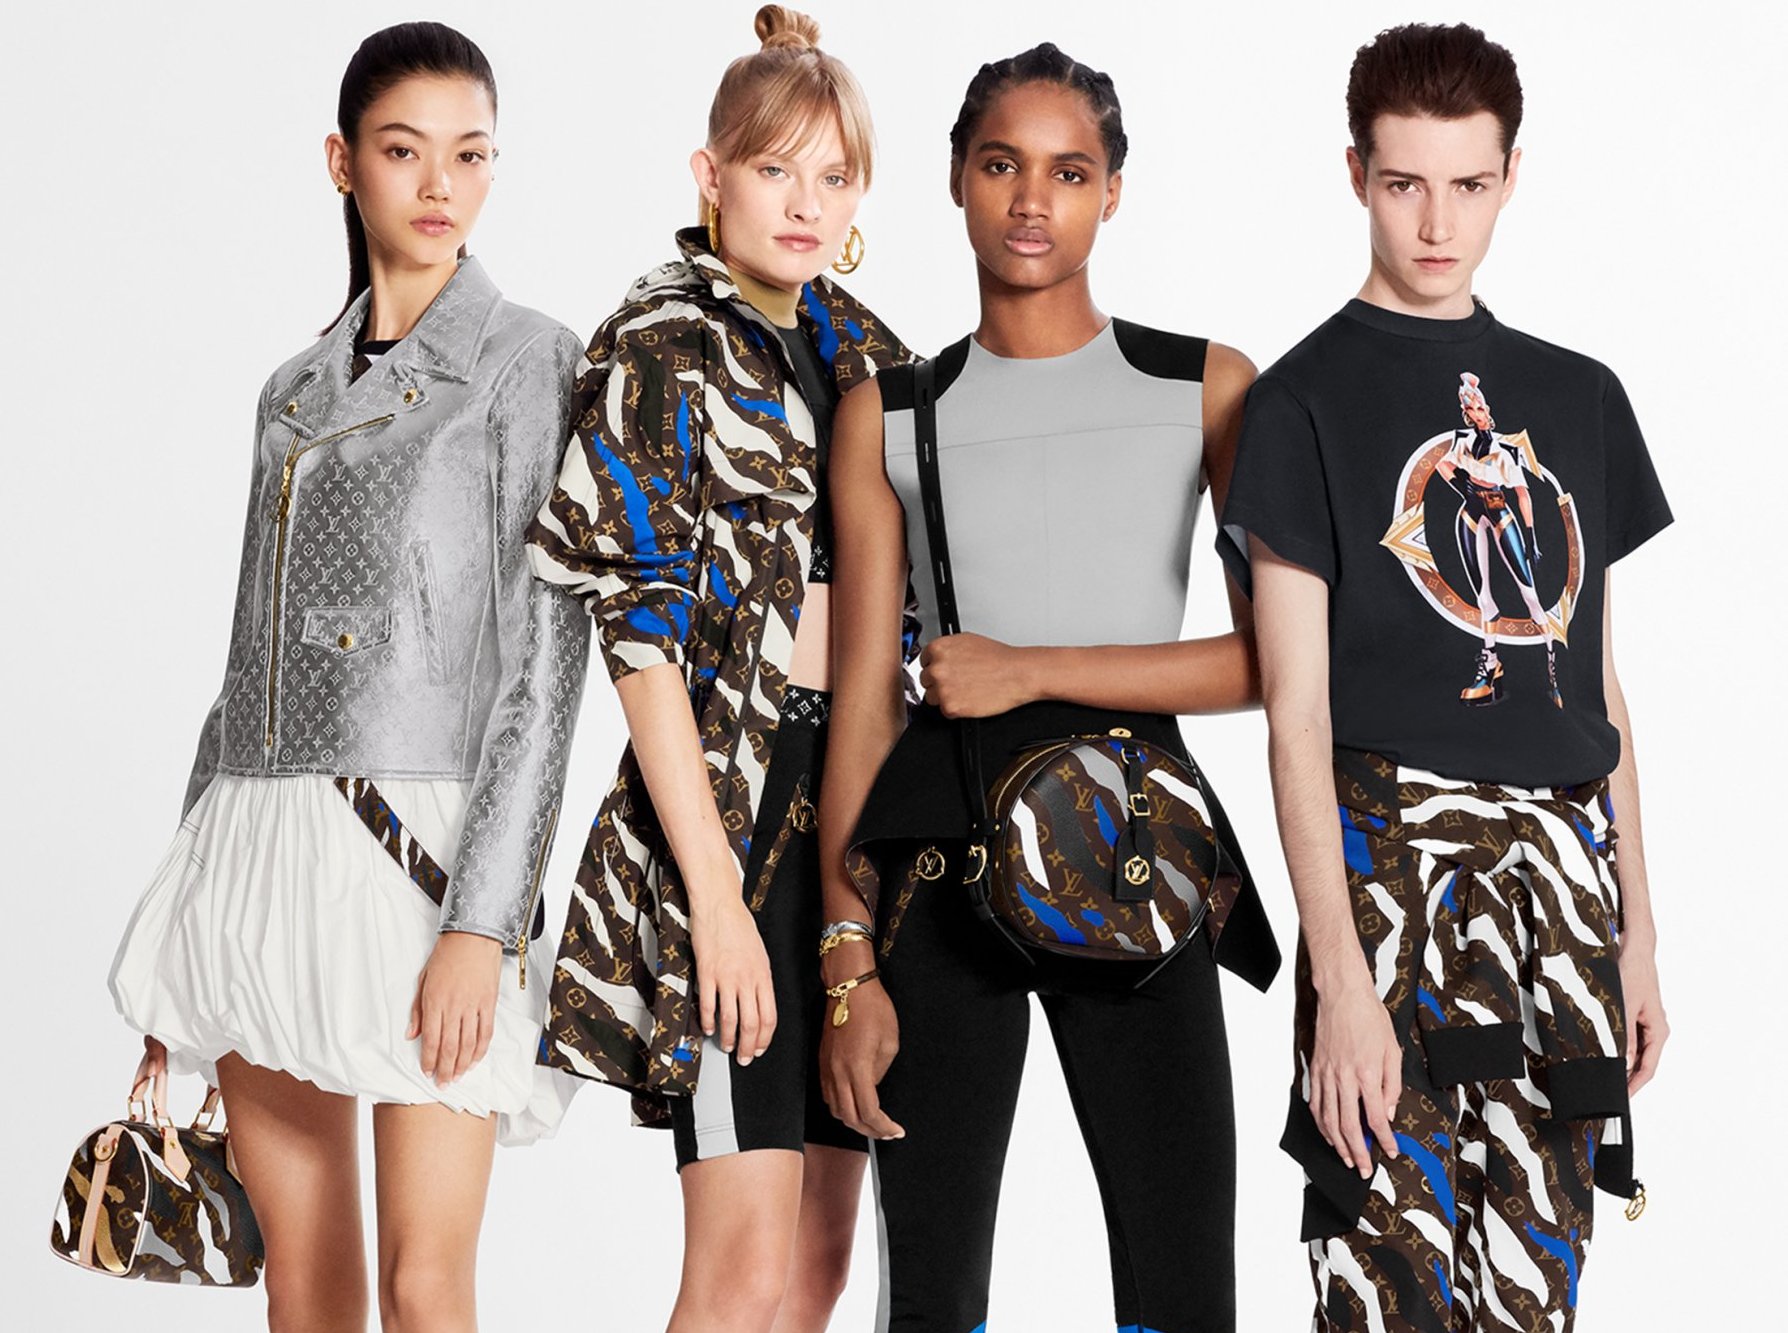 Louis Vuitton x League of Legends capsule collection now available with $5,650 leather jacket ...